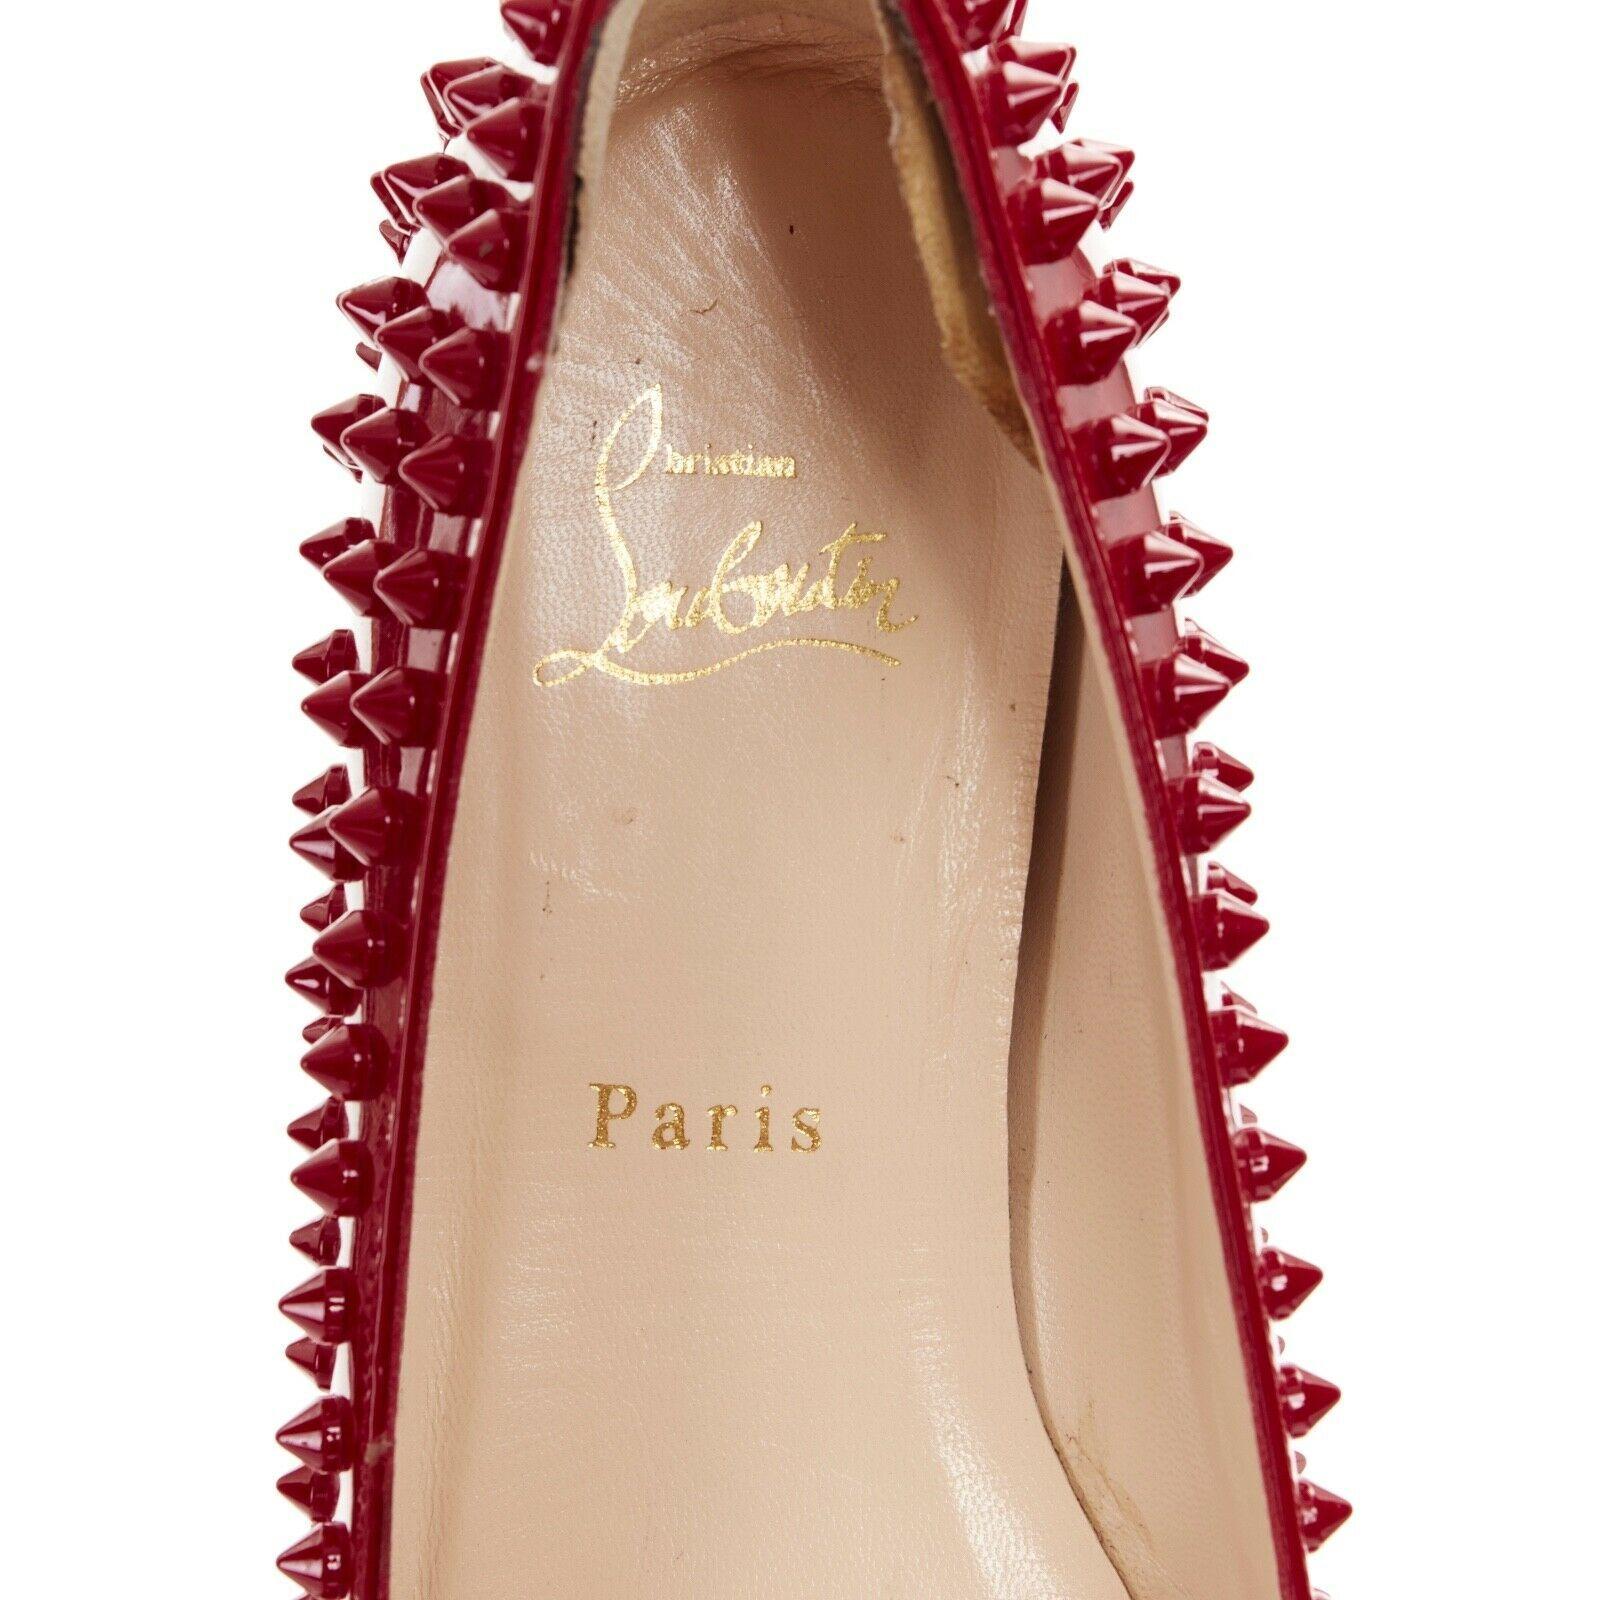 CHRISTIAN LOUBOUTIN Pigalle Spikes red patent studded pointy flats EU38.5 4